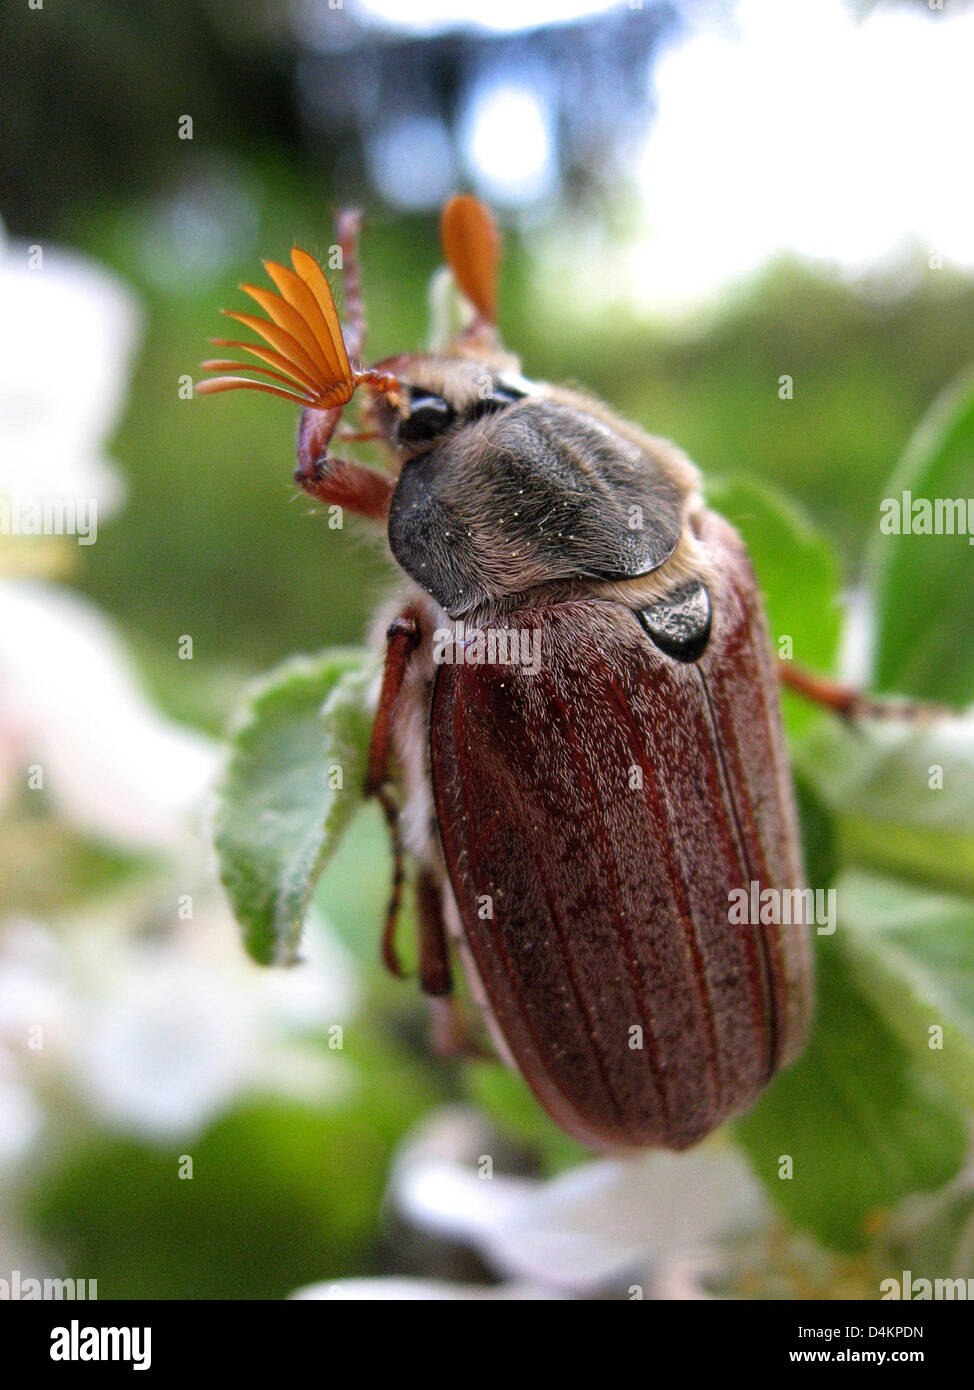 A cockchafer sits on an apple tree in Berlin, Germany, 28 April 2009. While promenaders enjoy the presence of the insect, forest warneders are sceptical about the chafer. Photo: Wolfgang Kumm Stock Photo